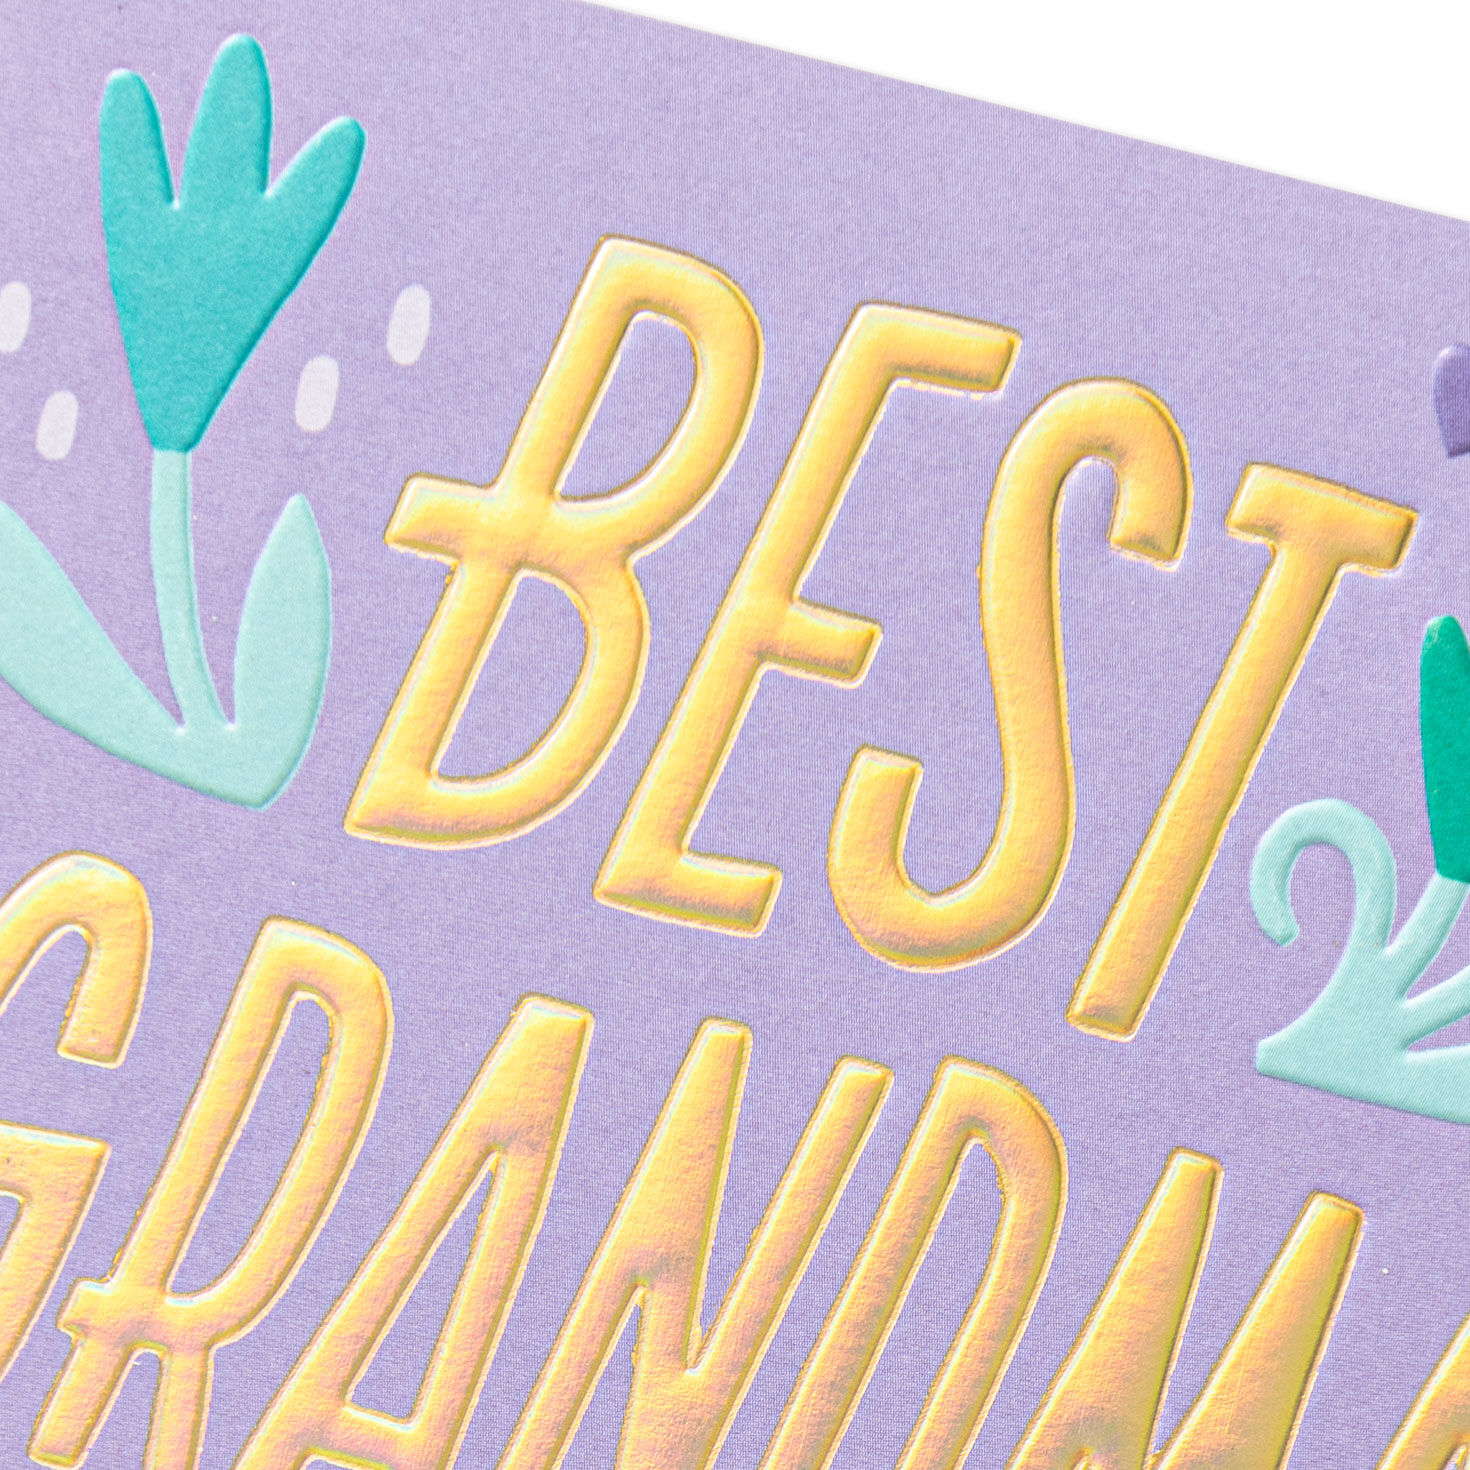 Best Grandma Ever Mother's Day Card From Grandkid for only USD 4.99 | Hallmark